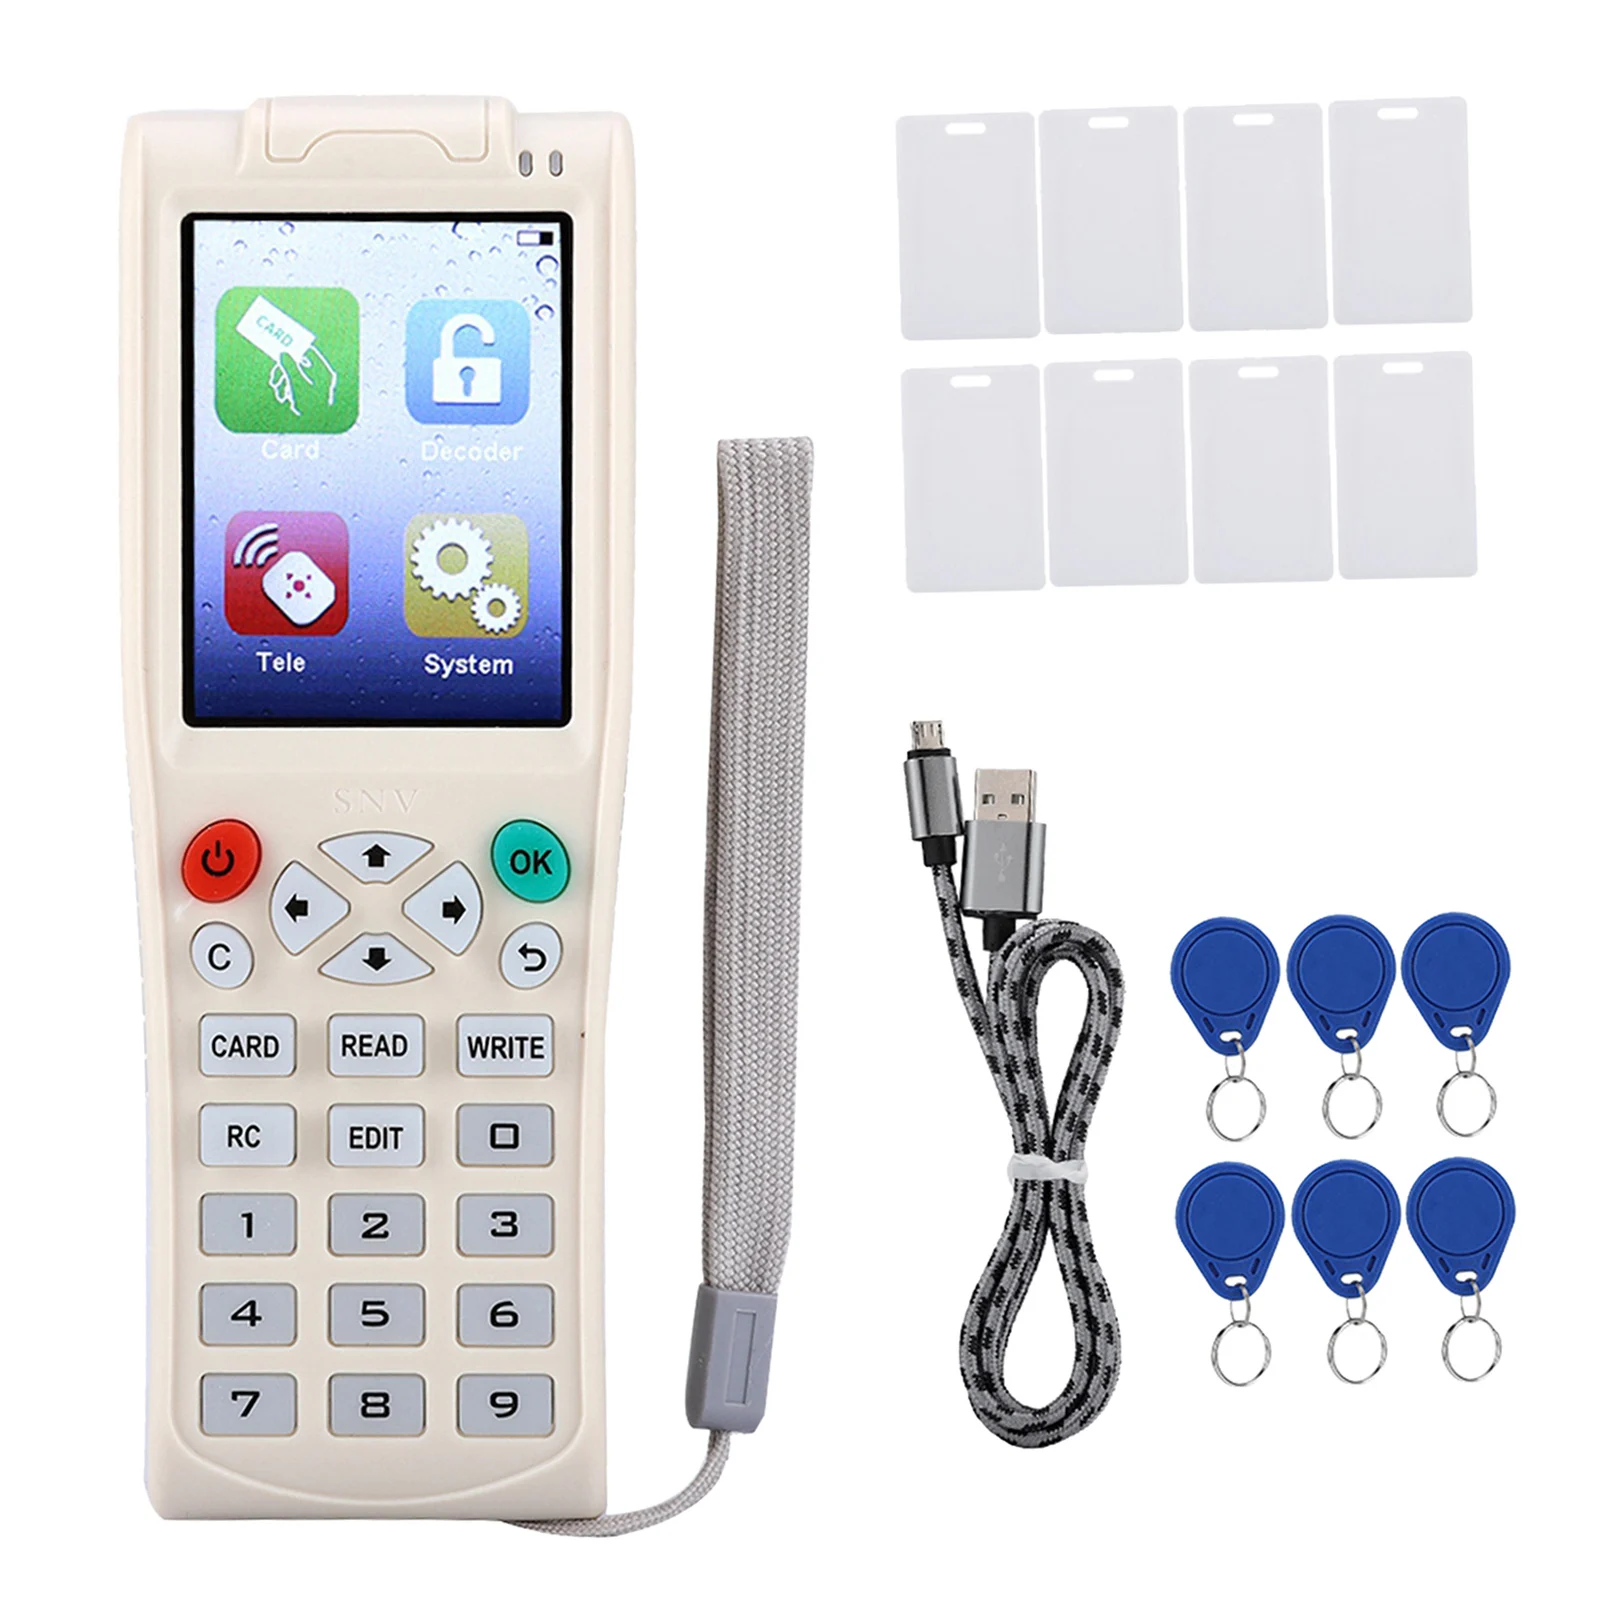 Handheld RFID Card Reader Writer Copier Duplicator Recordable Access Control System for ID Card 4100, 8265, 5200, 5577, 8268